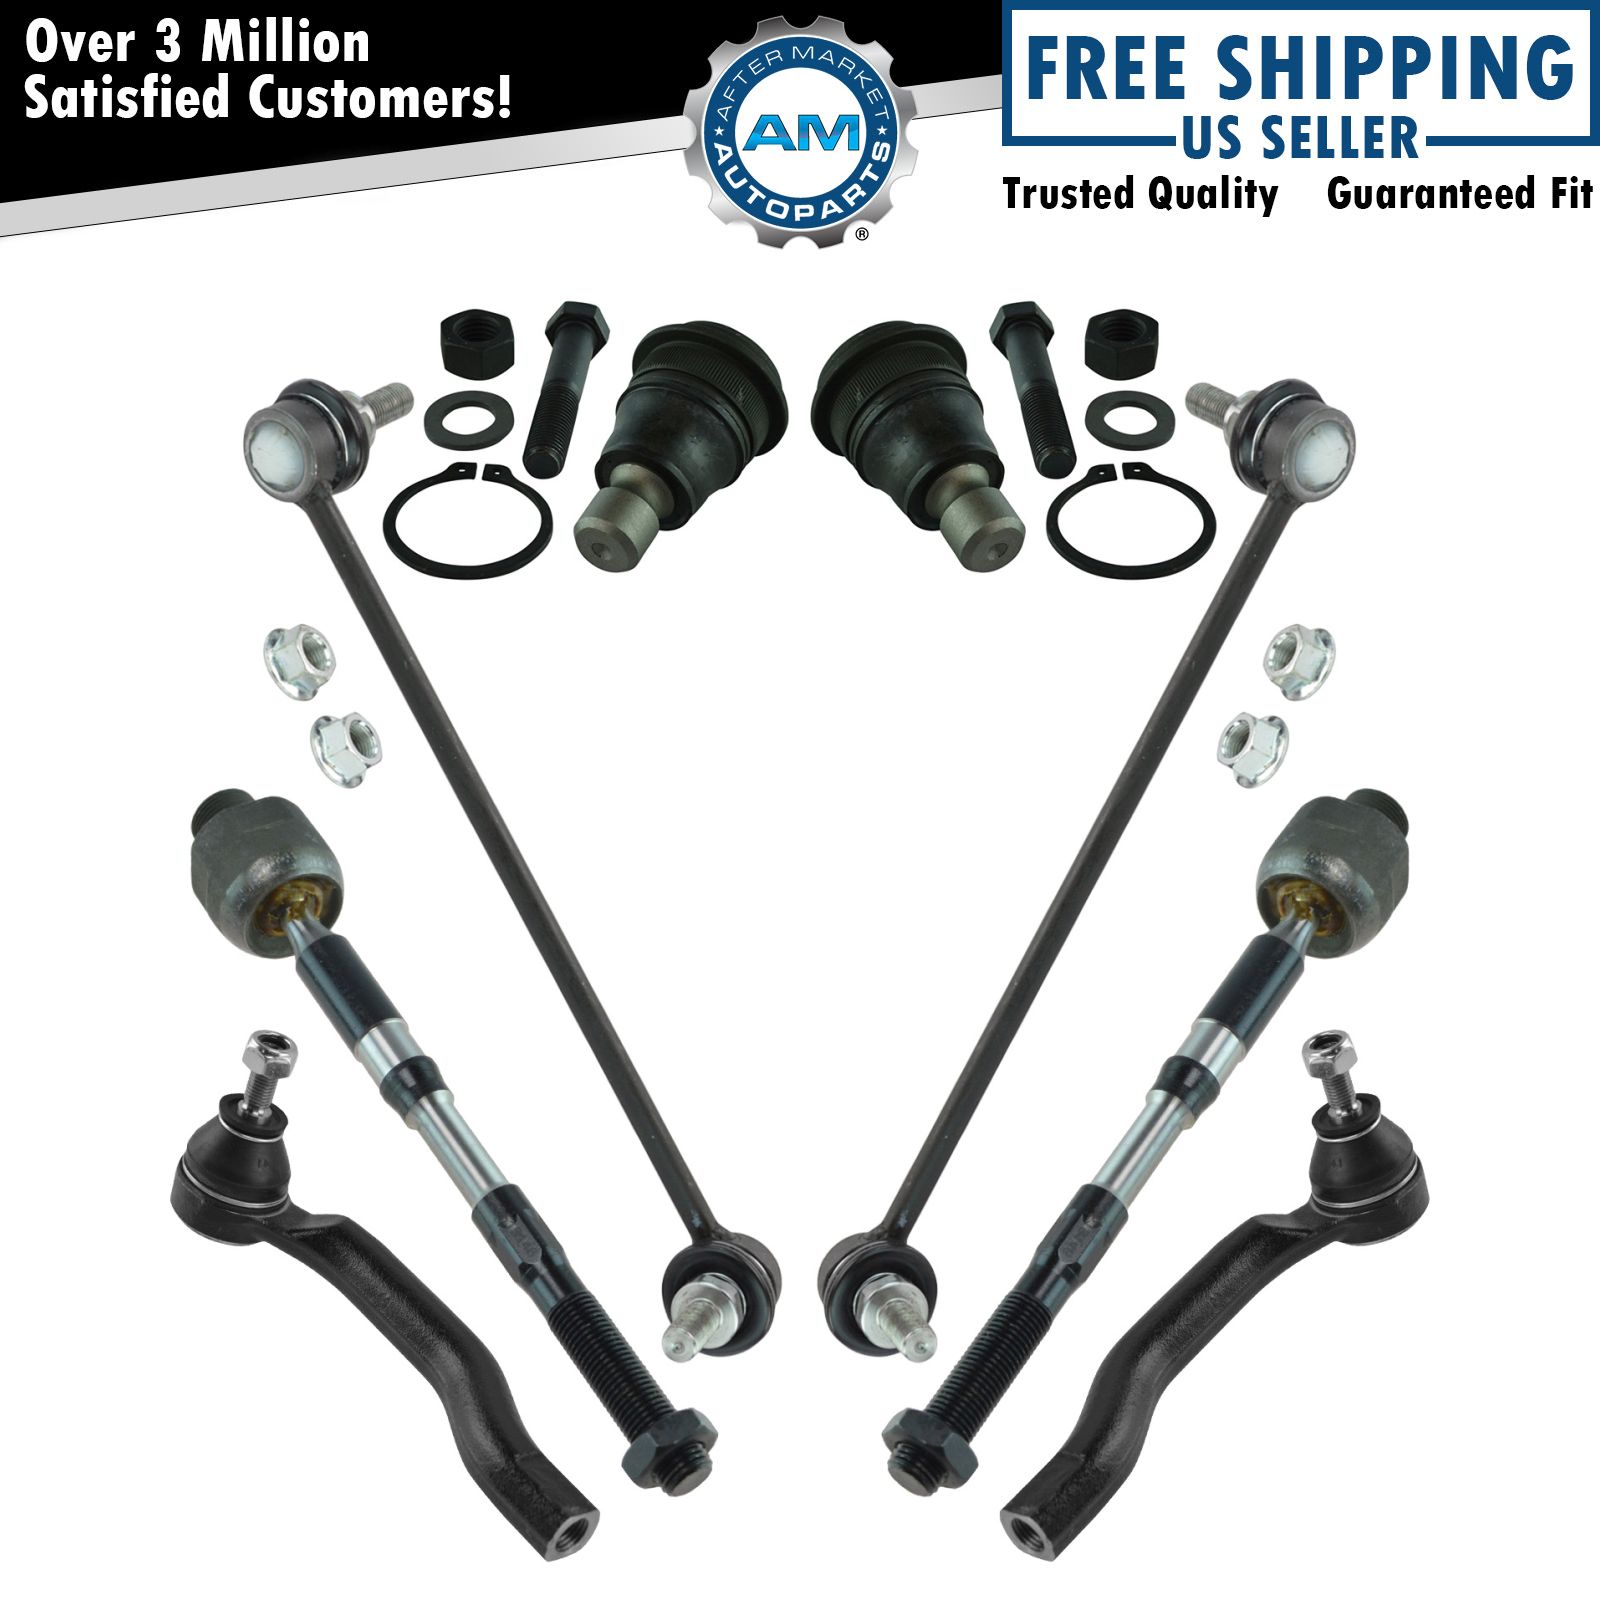 Front Steering & Suspension Kit Fits 2008-2013 Nissan Rogue